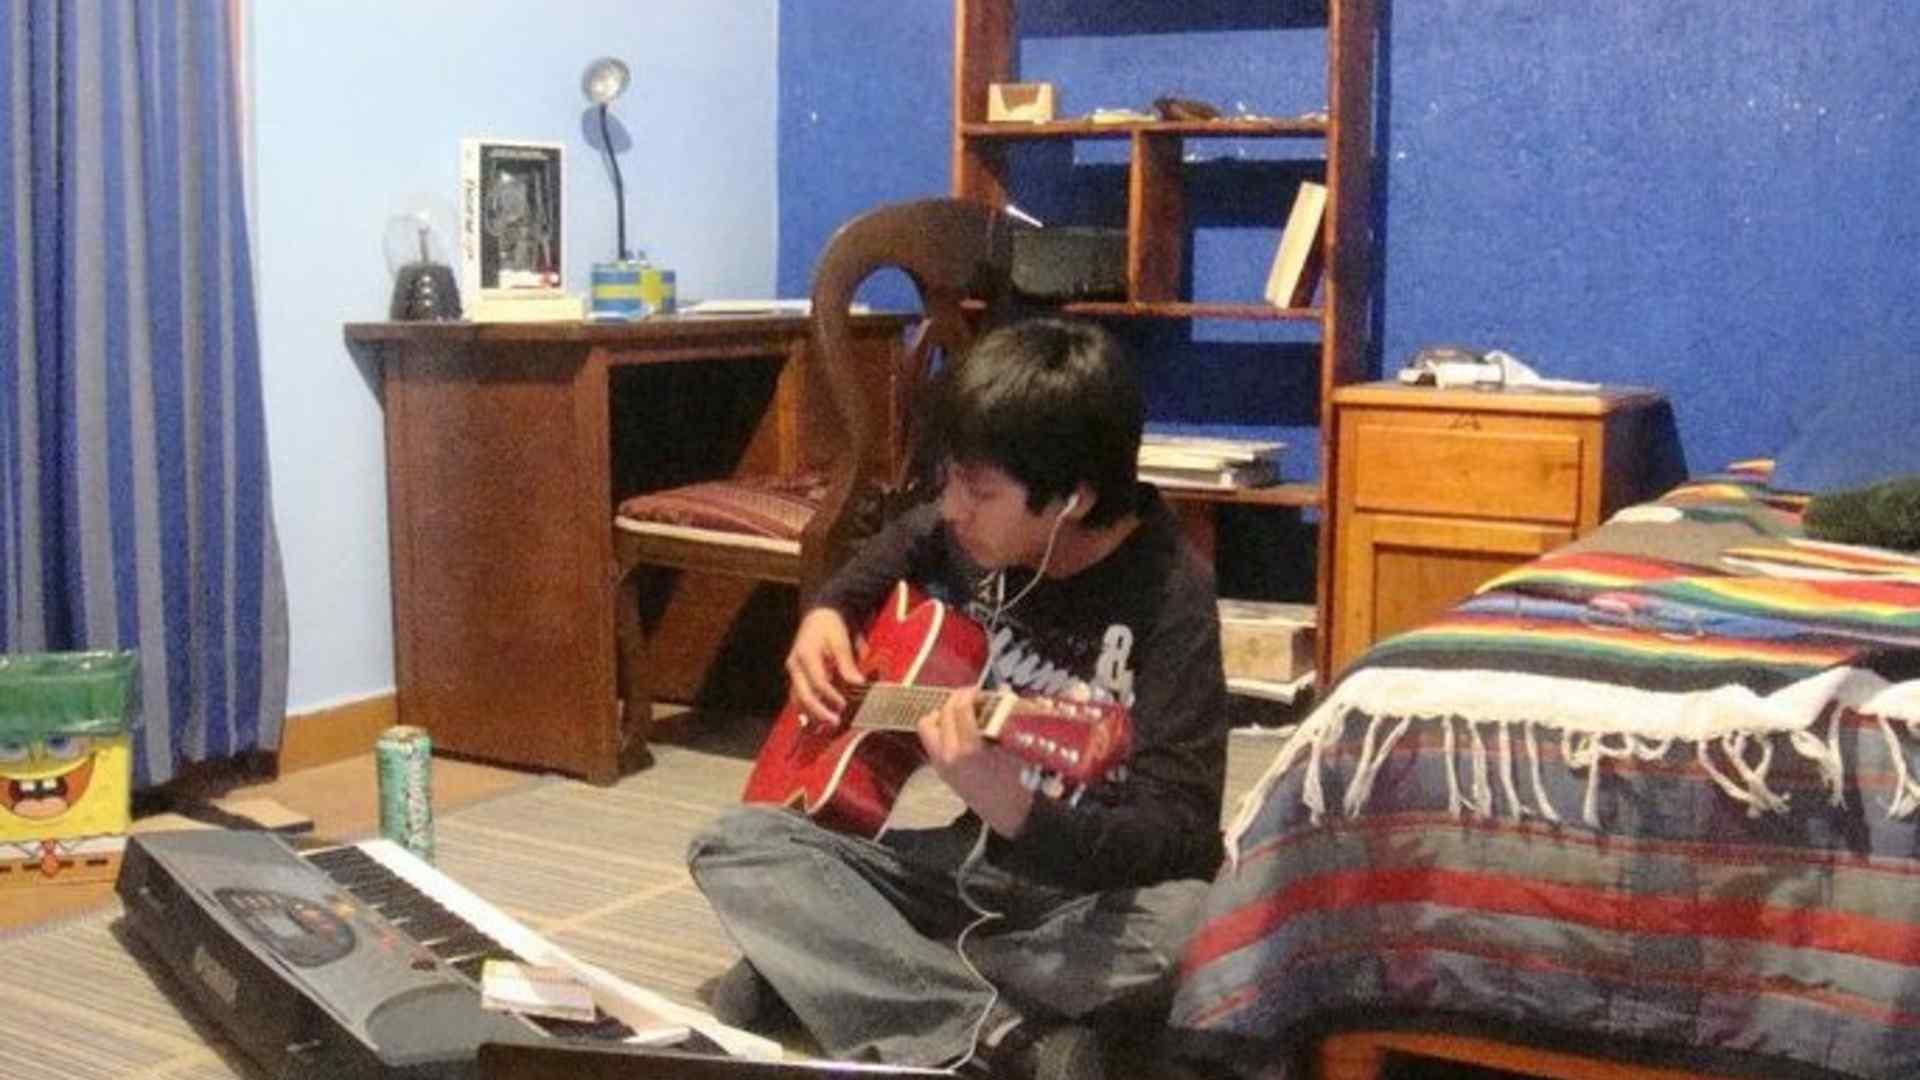 Young Horacio playing guitar on the floor of his room